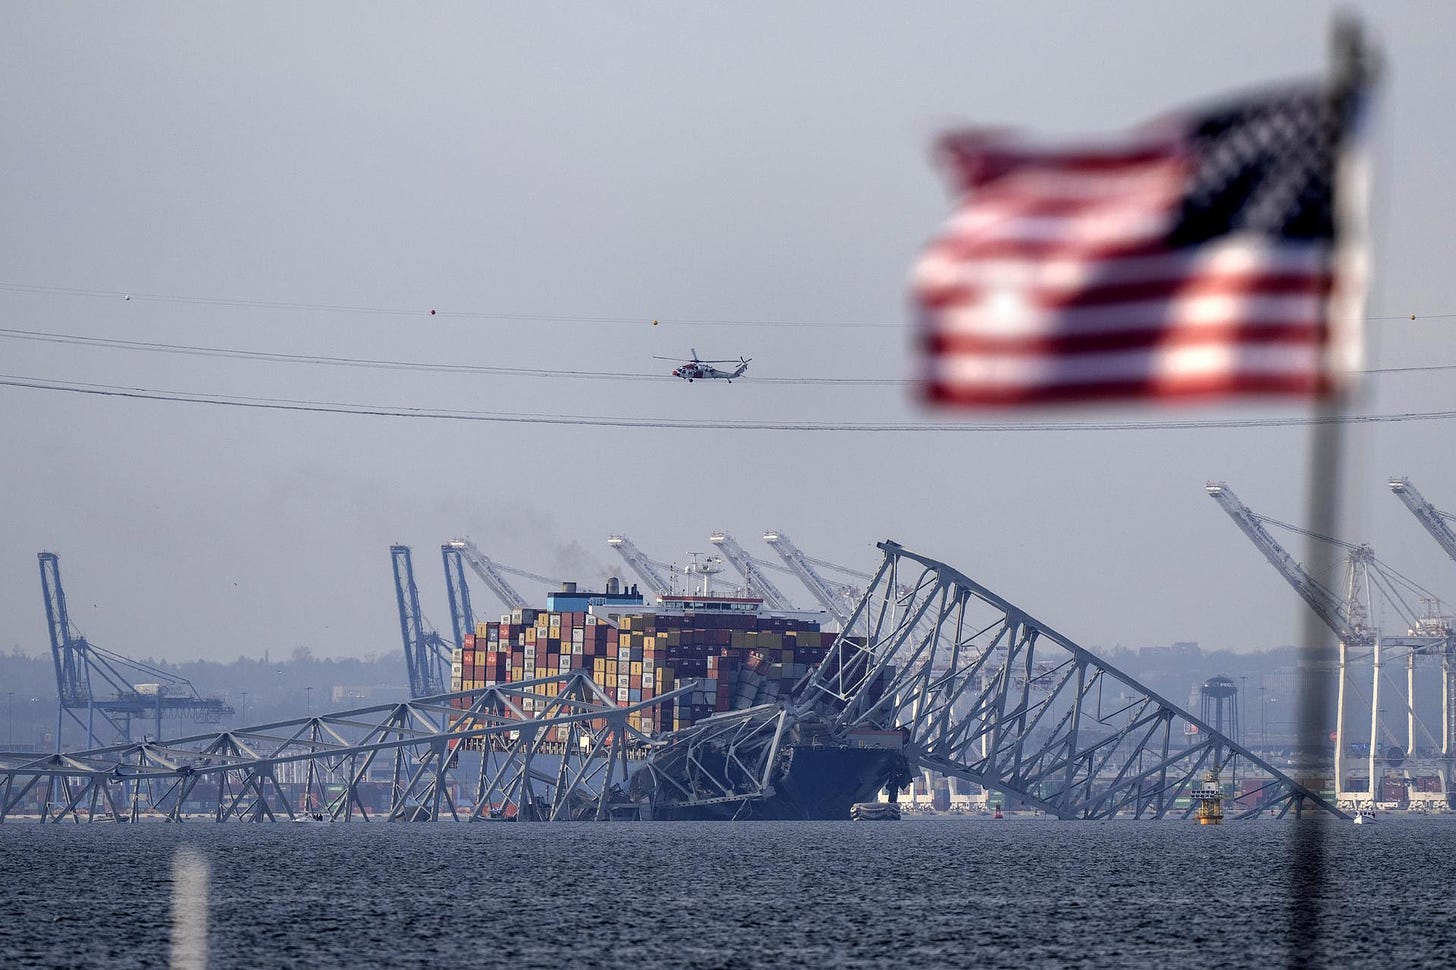 An American flag flies on a moored boat near the container ship Dali and the wreckage of the Francis Scott Key Bridge.